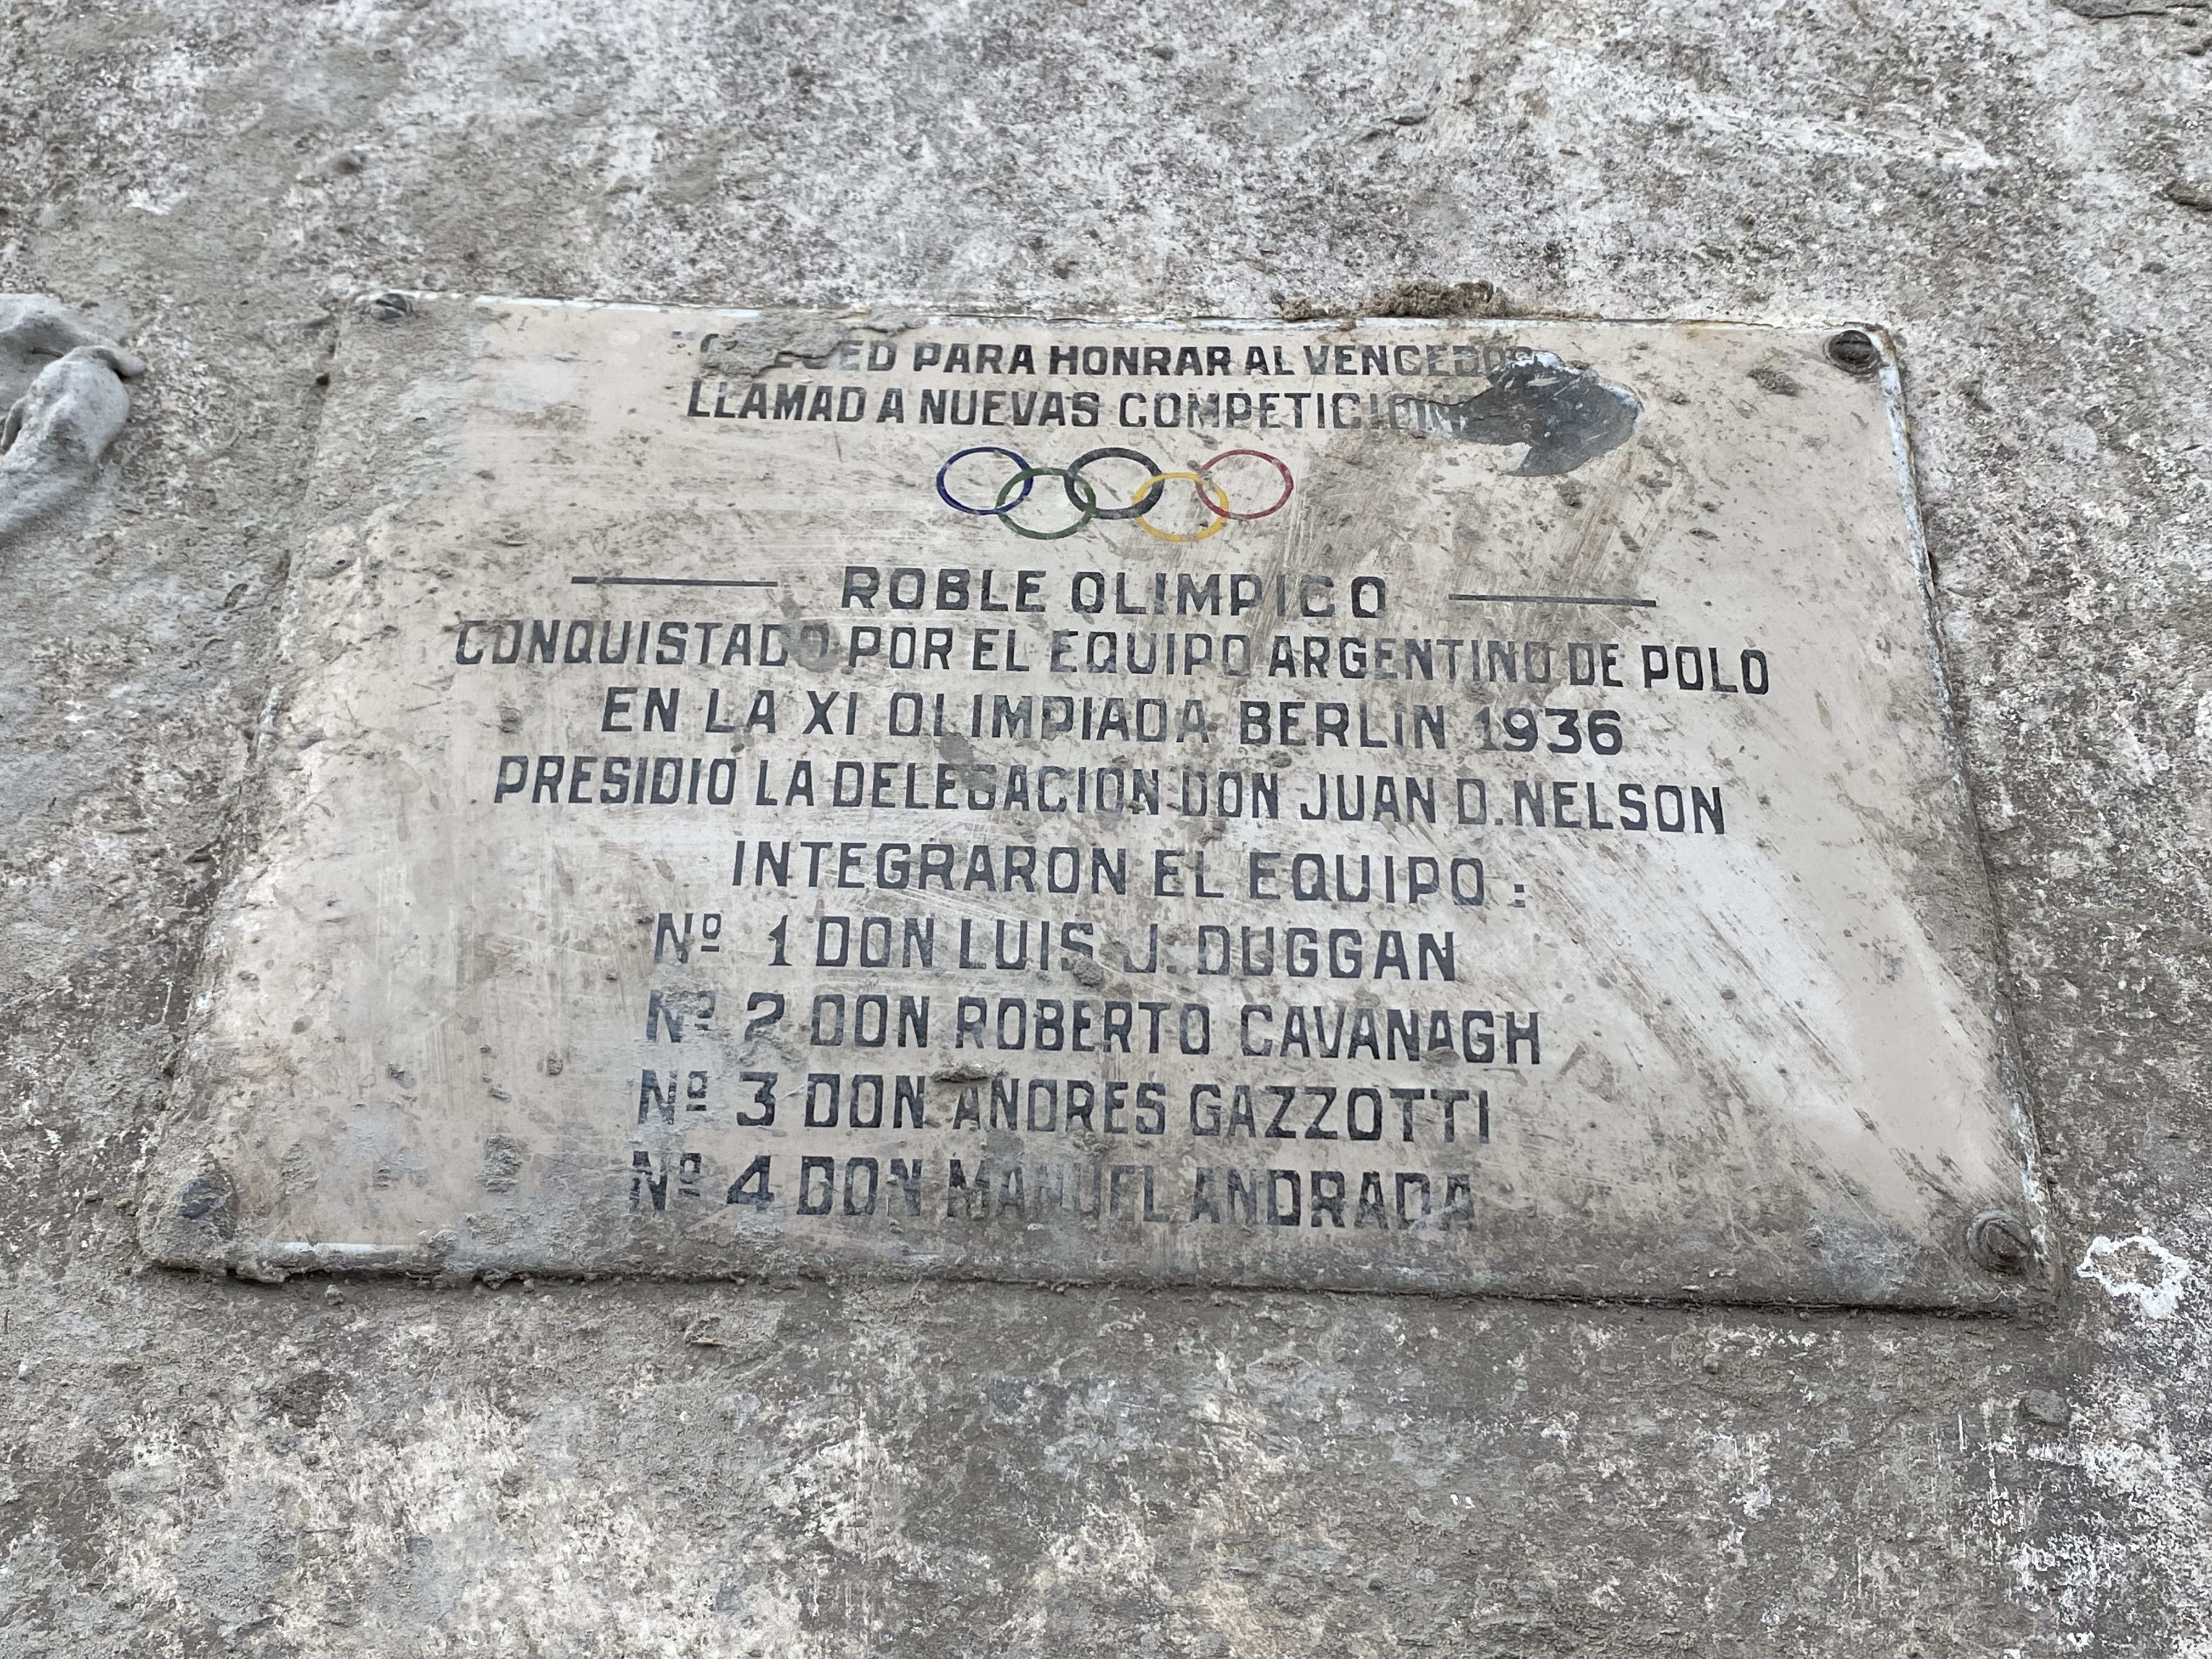 The plaque showing the Argentine team that won the gold medal in polo in Berlin 1936 / SEBASTIÁN FEST
